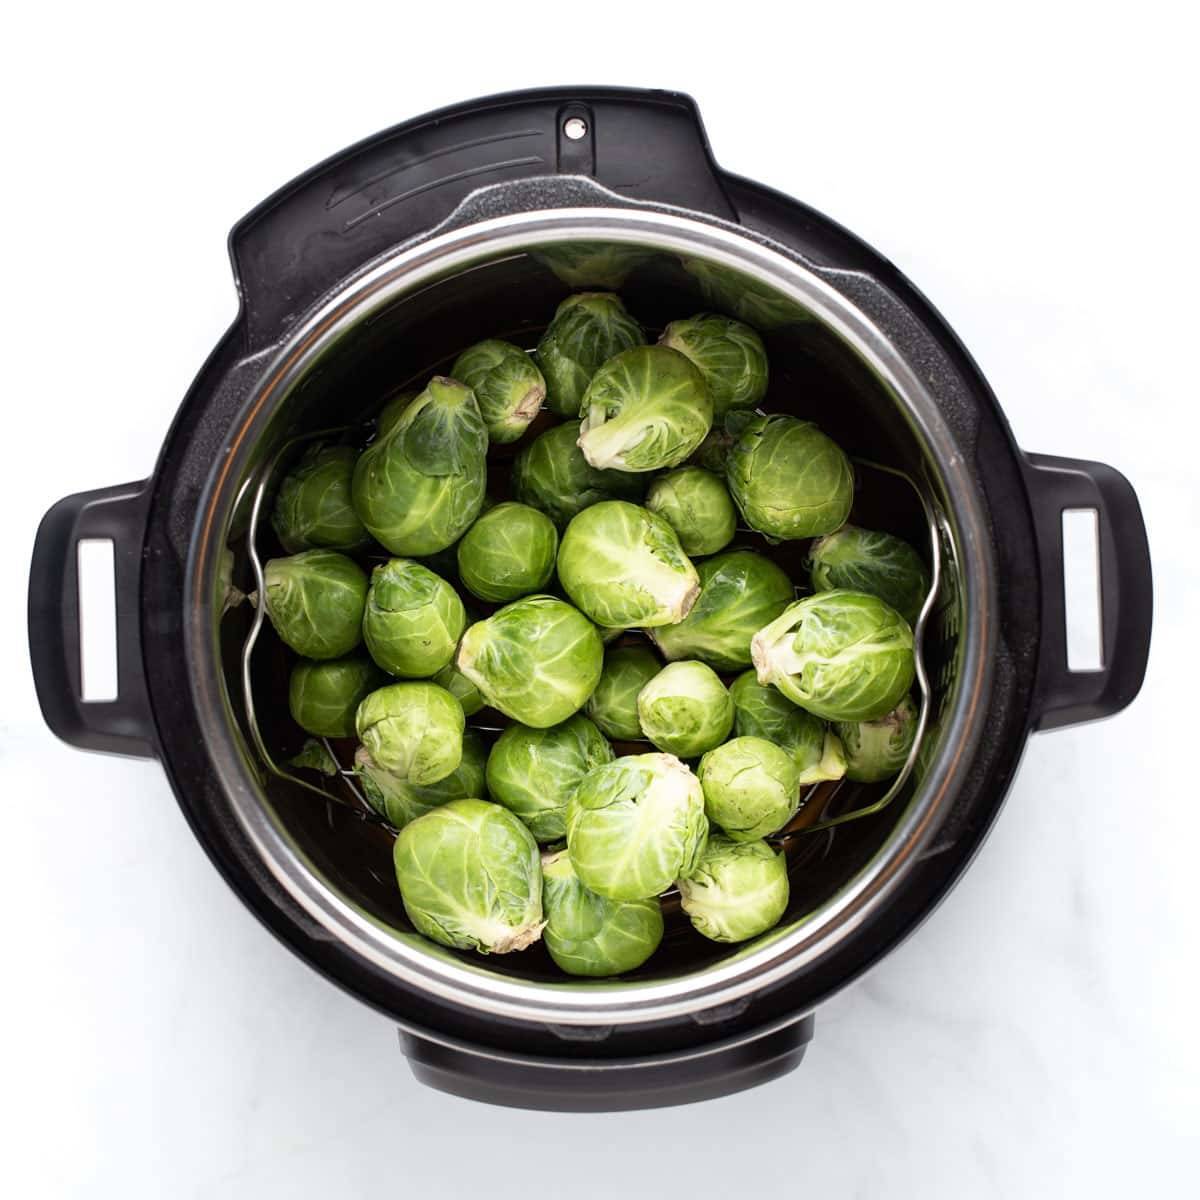 Raw Brussels sprouts in the Instant Pot.